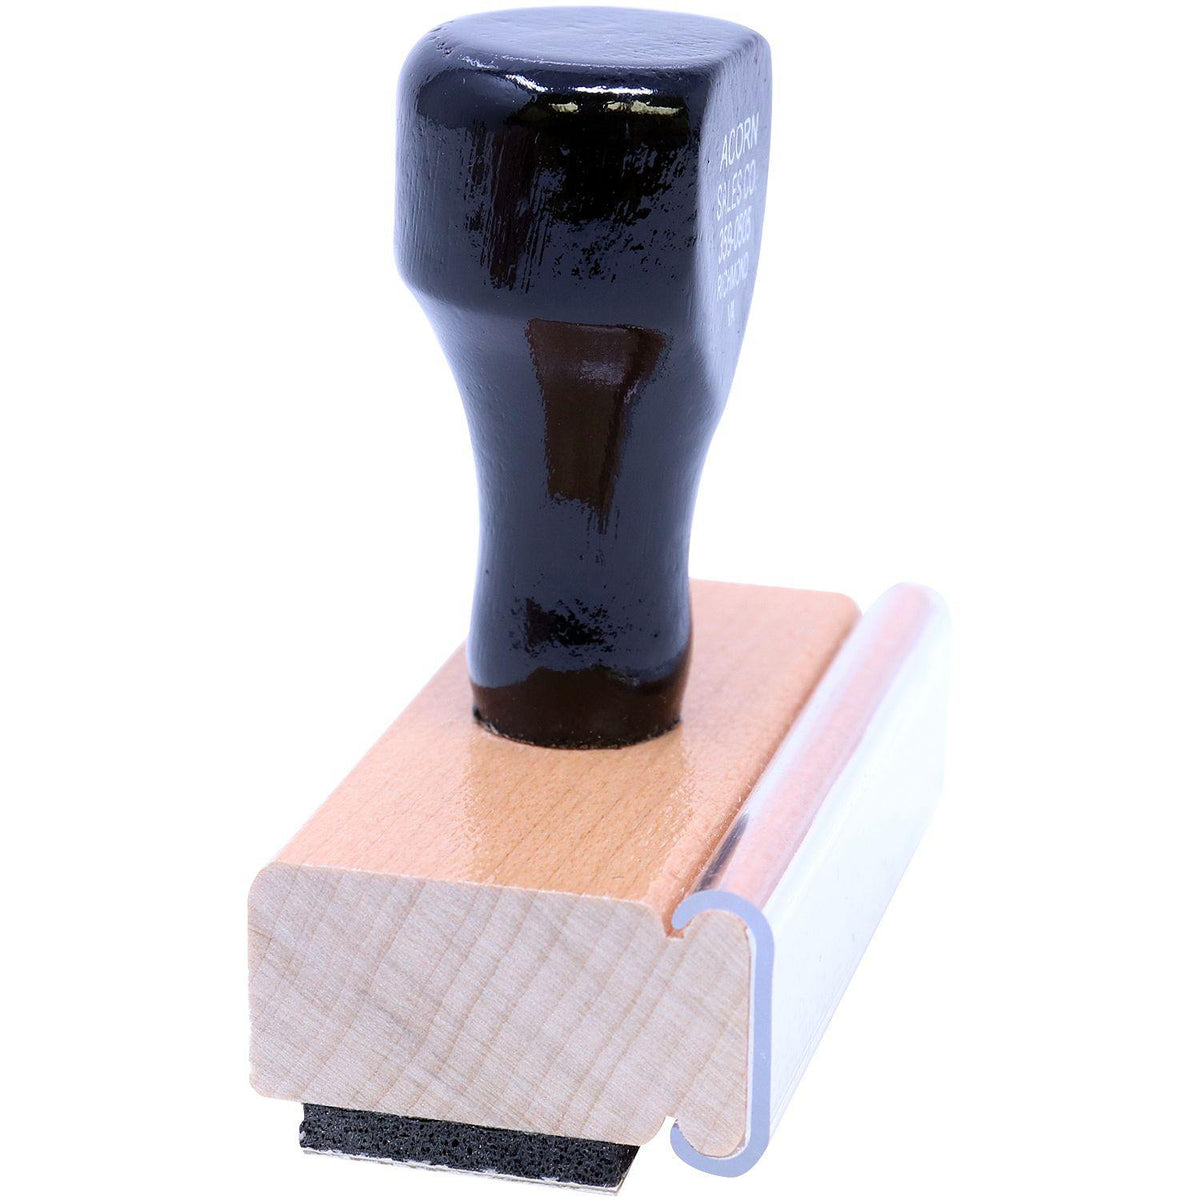 Lower Case First Class Rubber Stamp - Engineer Seal Stamps - Brand_Acorn, Impression Size_Small, Stamp Type_Regular Stamp, Type of Use_General, Type of Use_Office, Type of Use_Postal &amp; Mailing, Type of Use_Professional